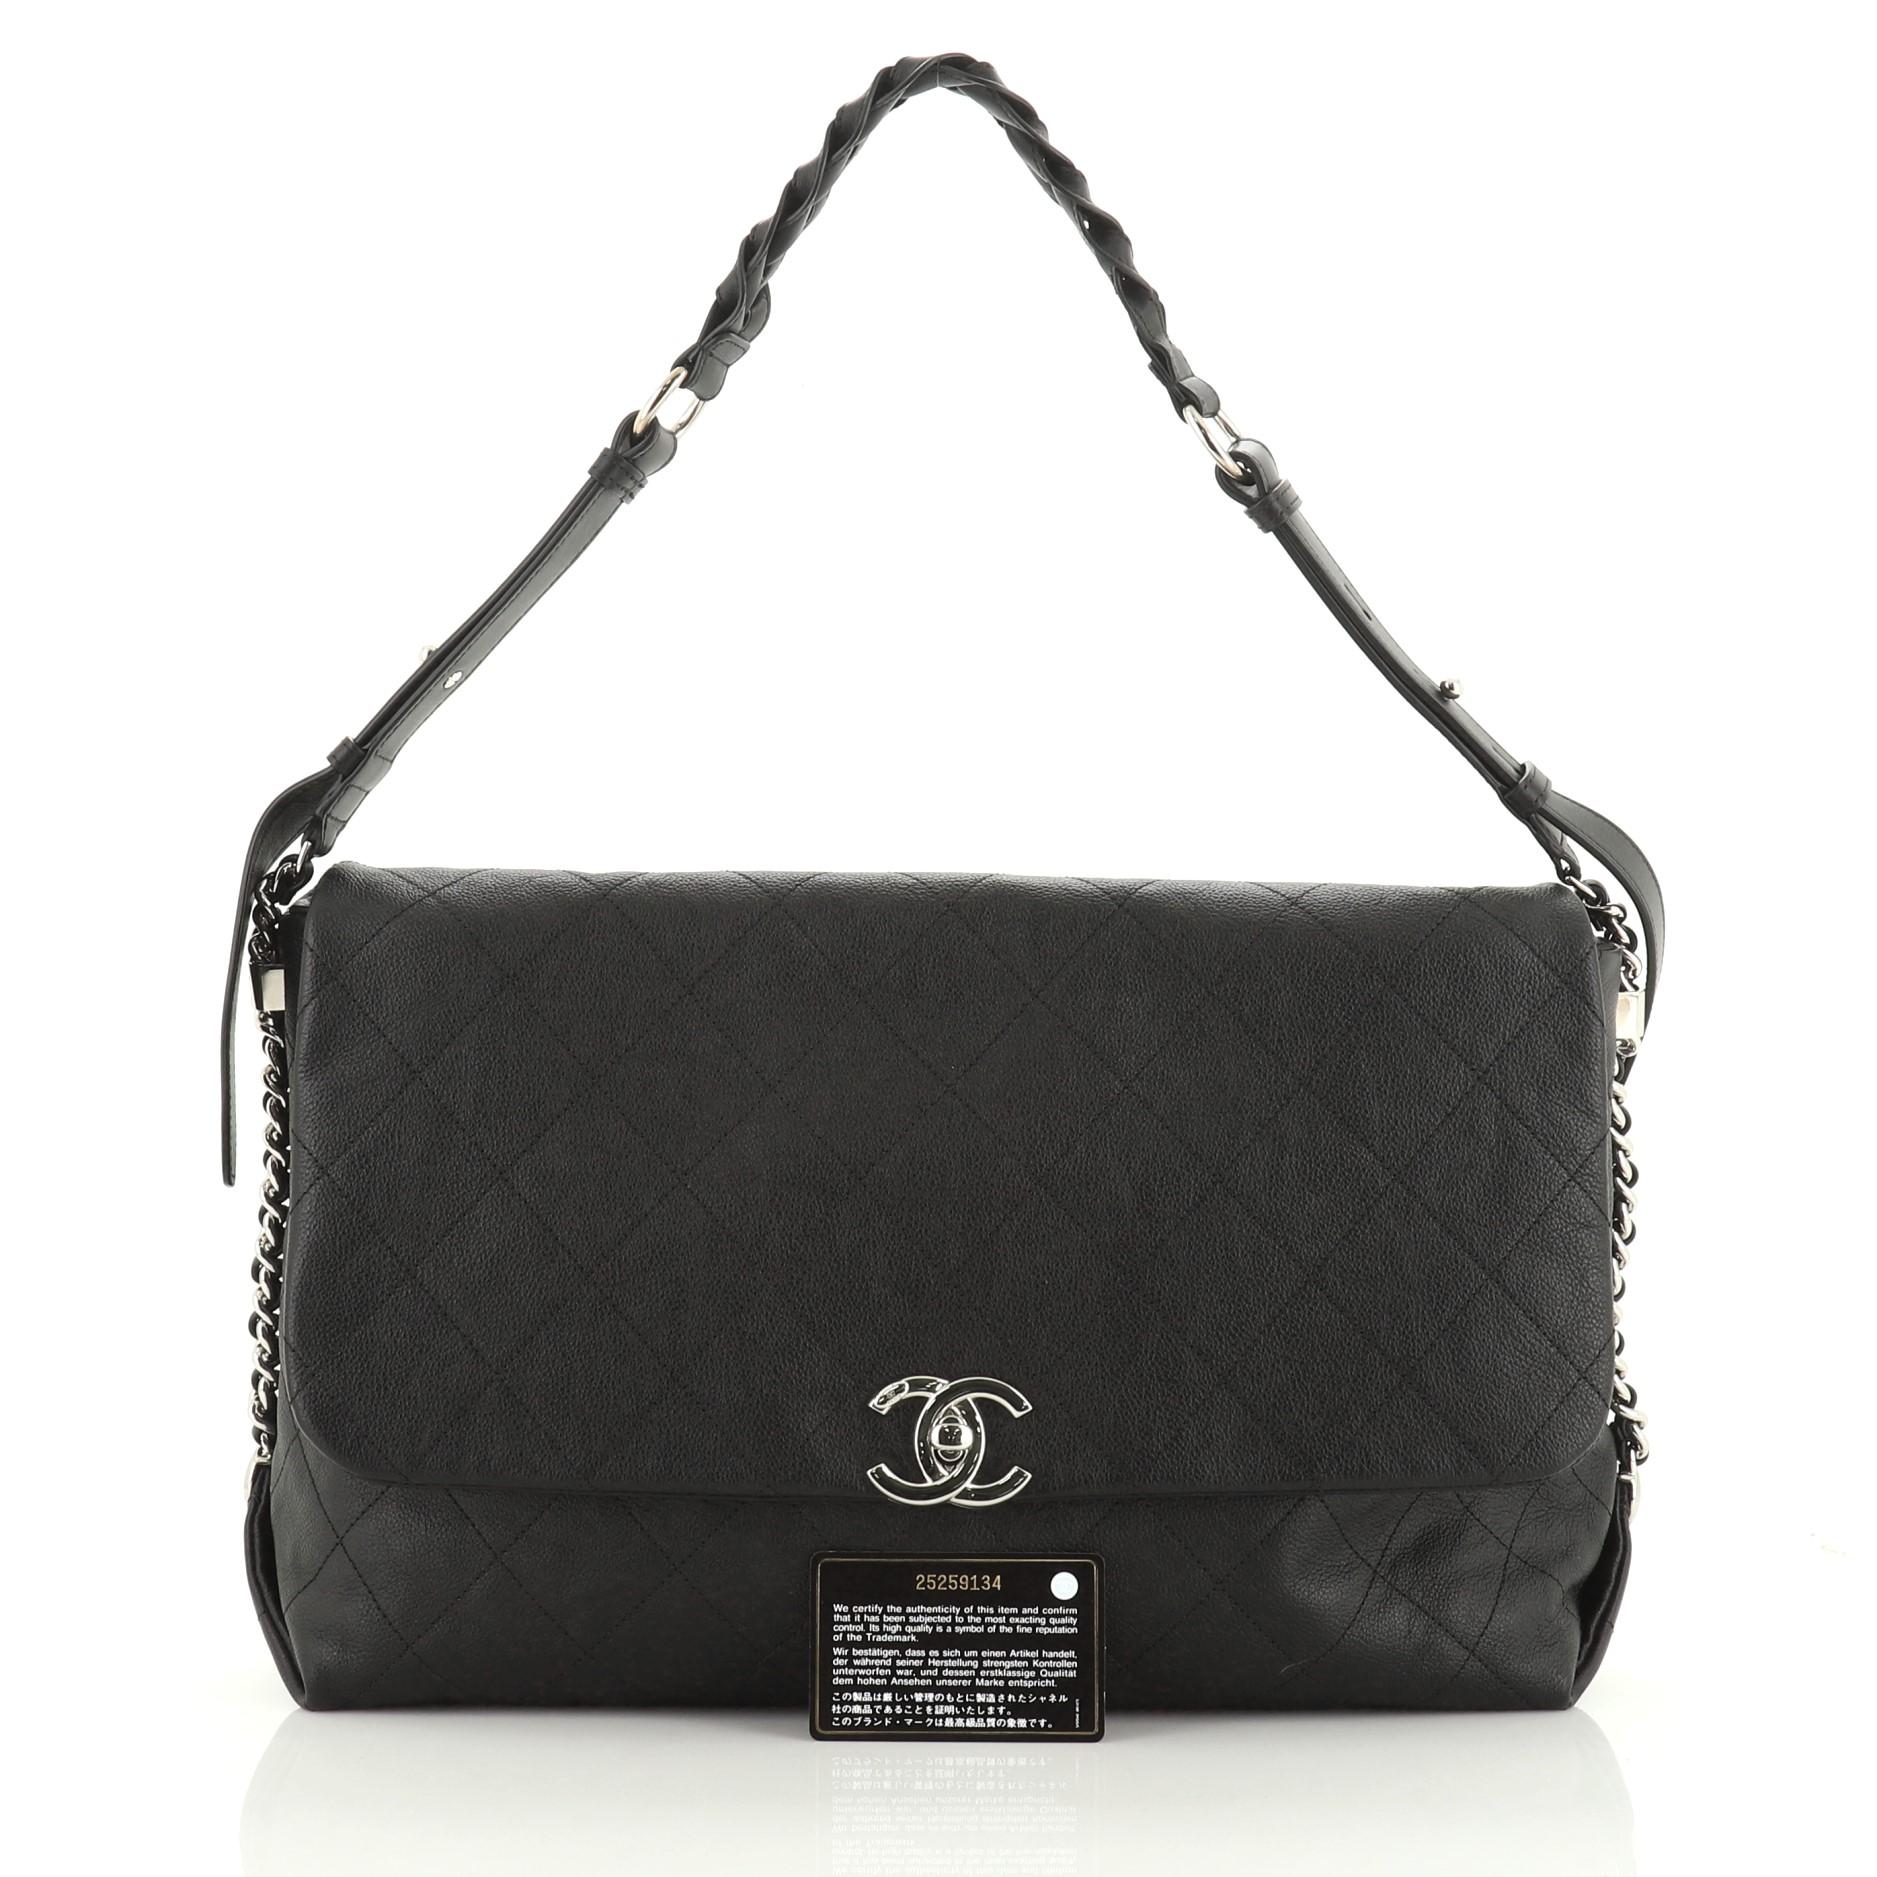 This Chanel Braided With Style Flap Bag Quilted Grained Calfskin Large, crafted in black leather, features braided adjustable shoulder strap and silver-tone hardware. Its CC turn-lock closure opens to a black fabric interior. Hologram sticker reads: